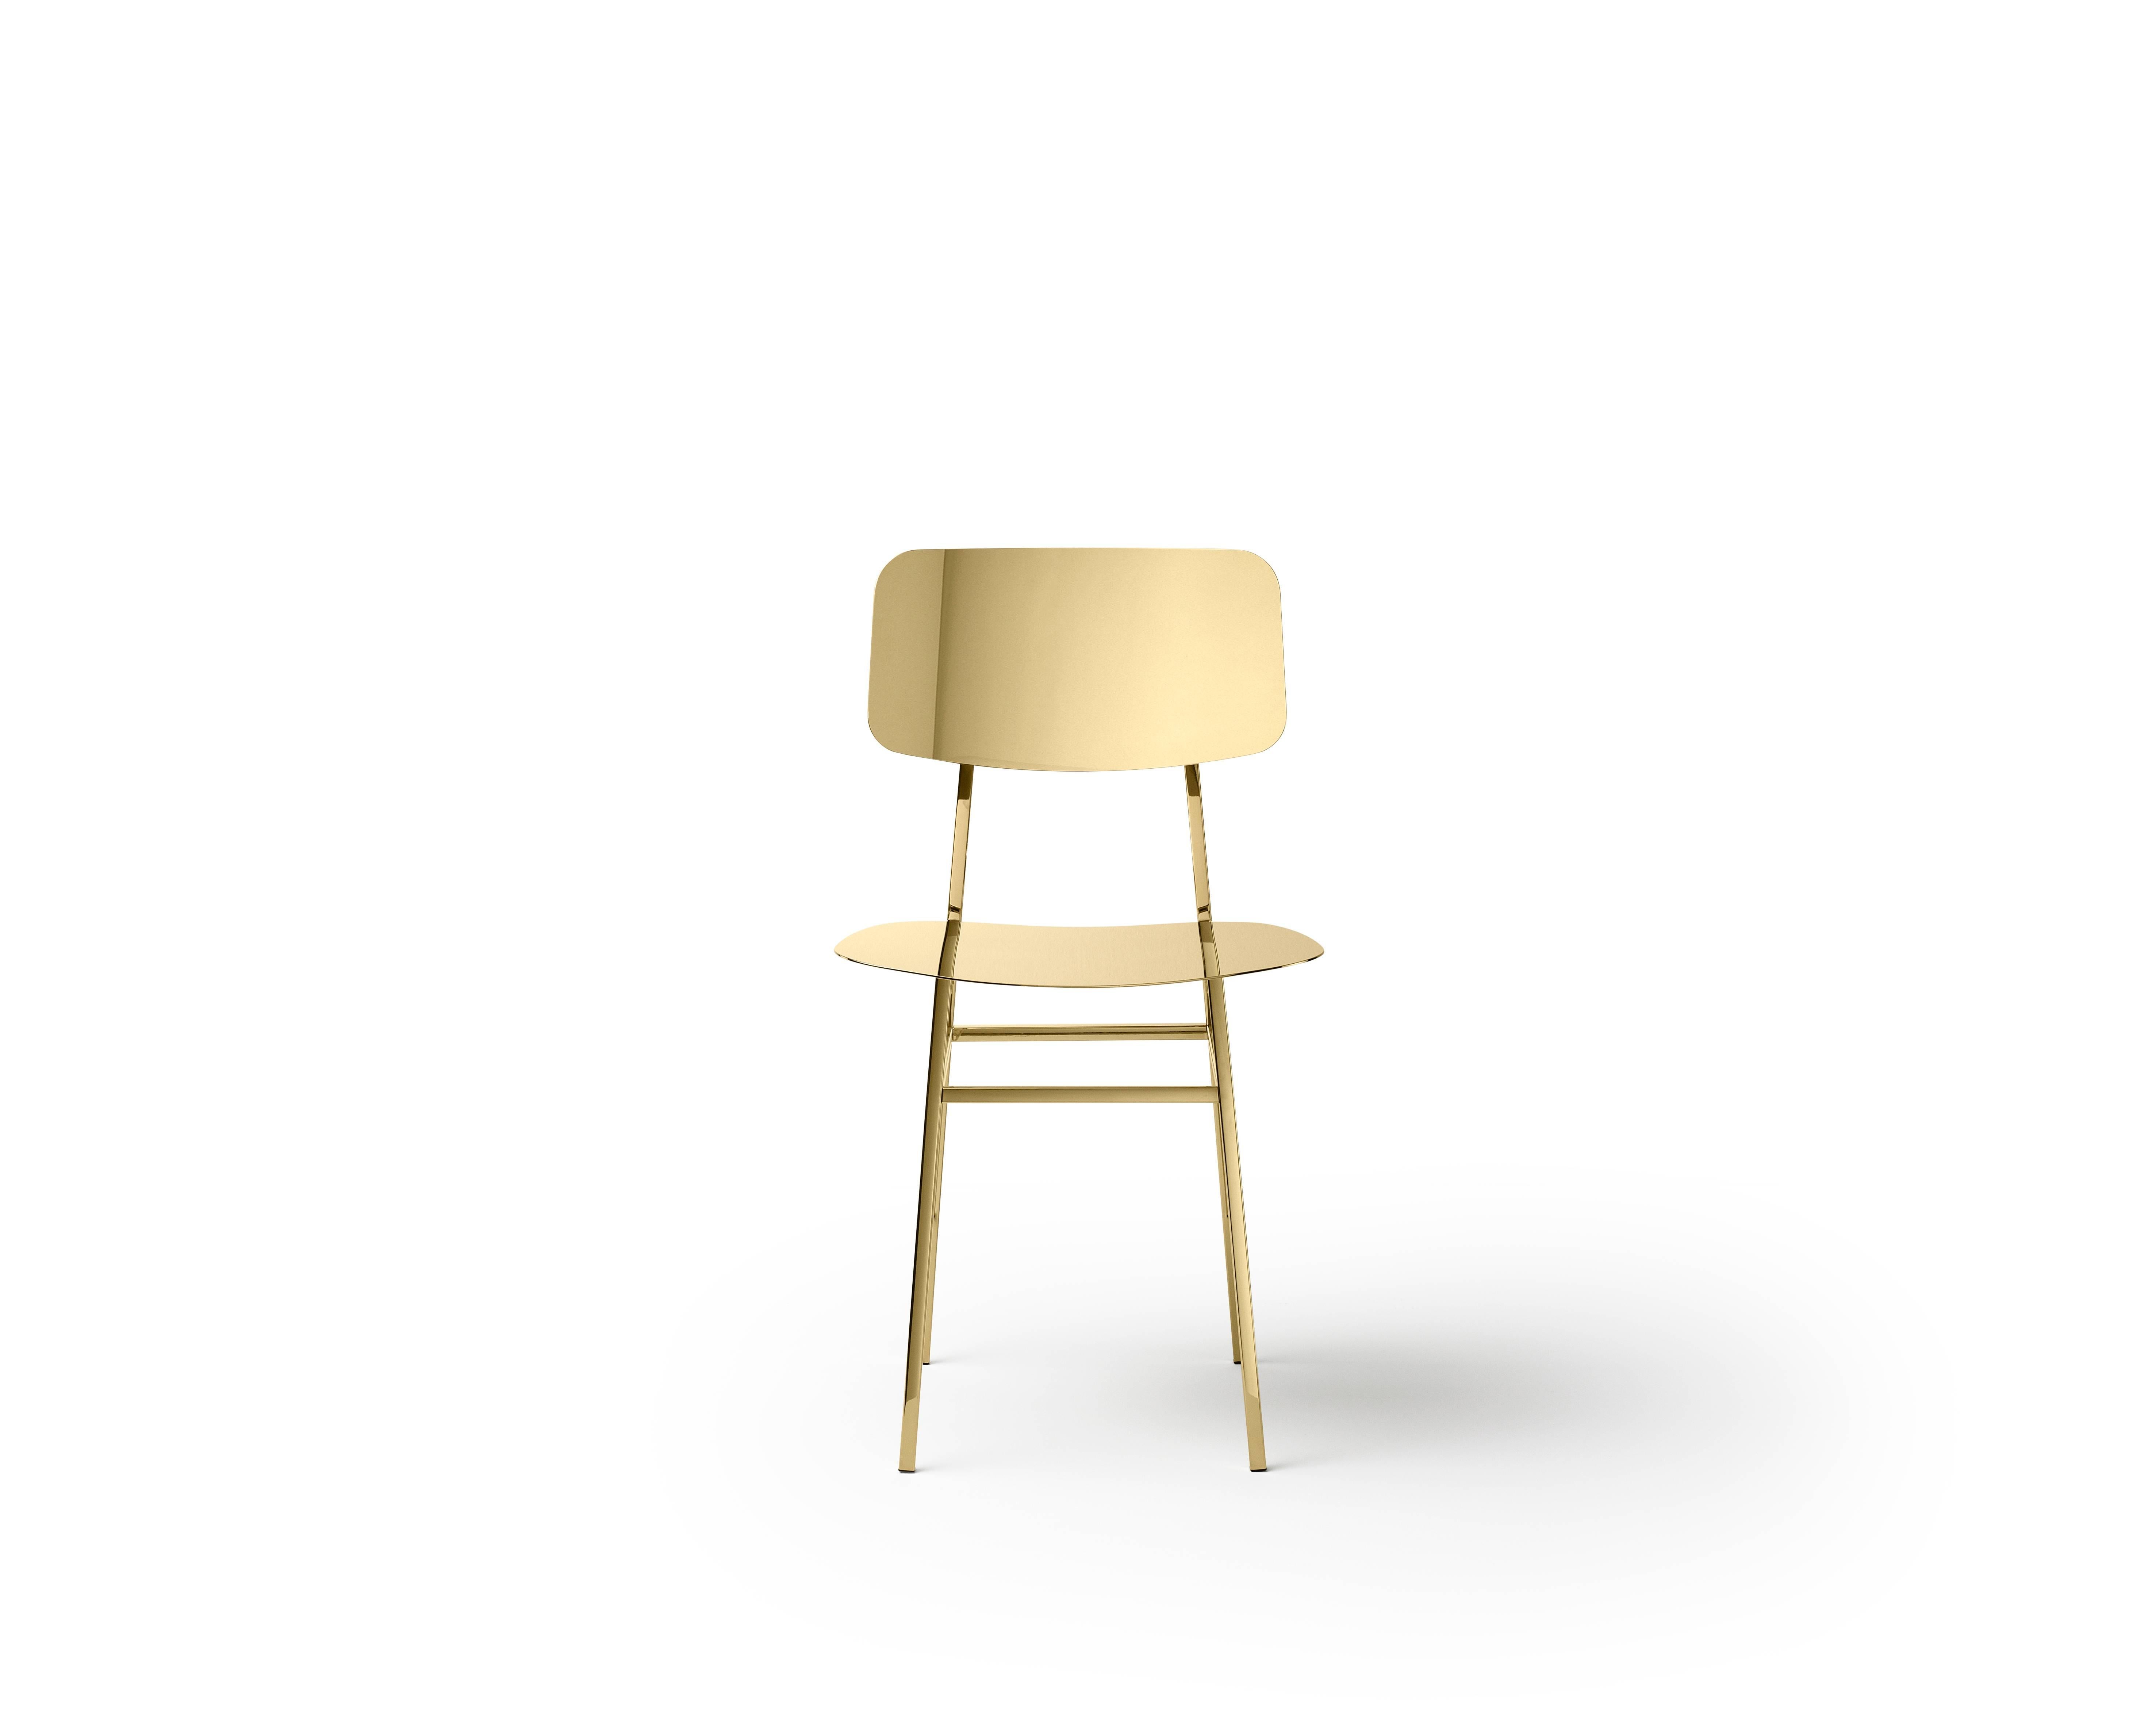 Chair in stainless steel finished in polished brass designed by Nika Zupanc.